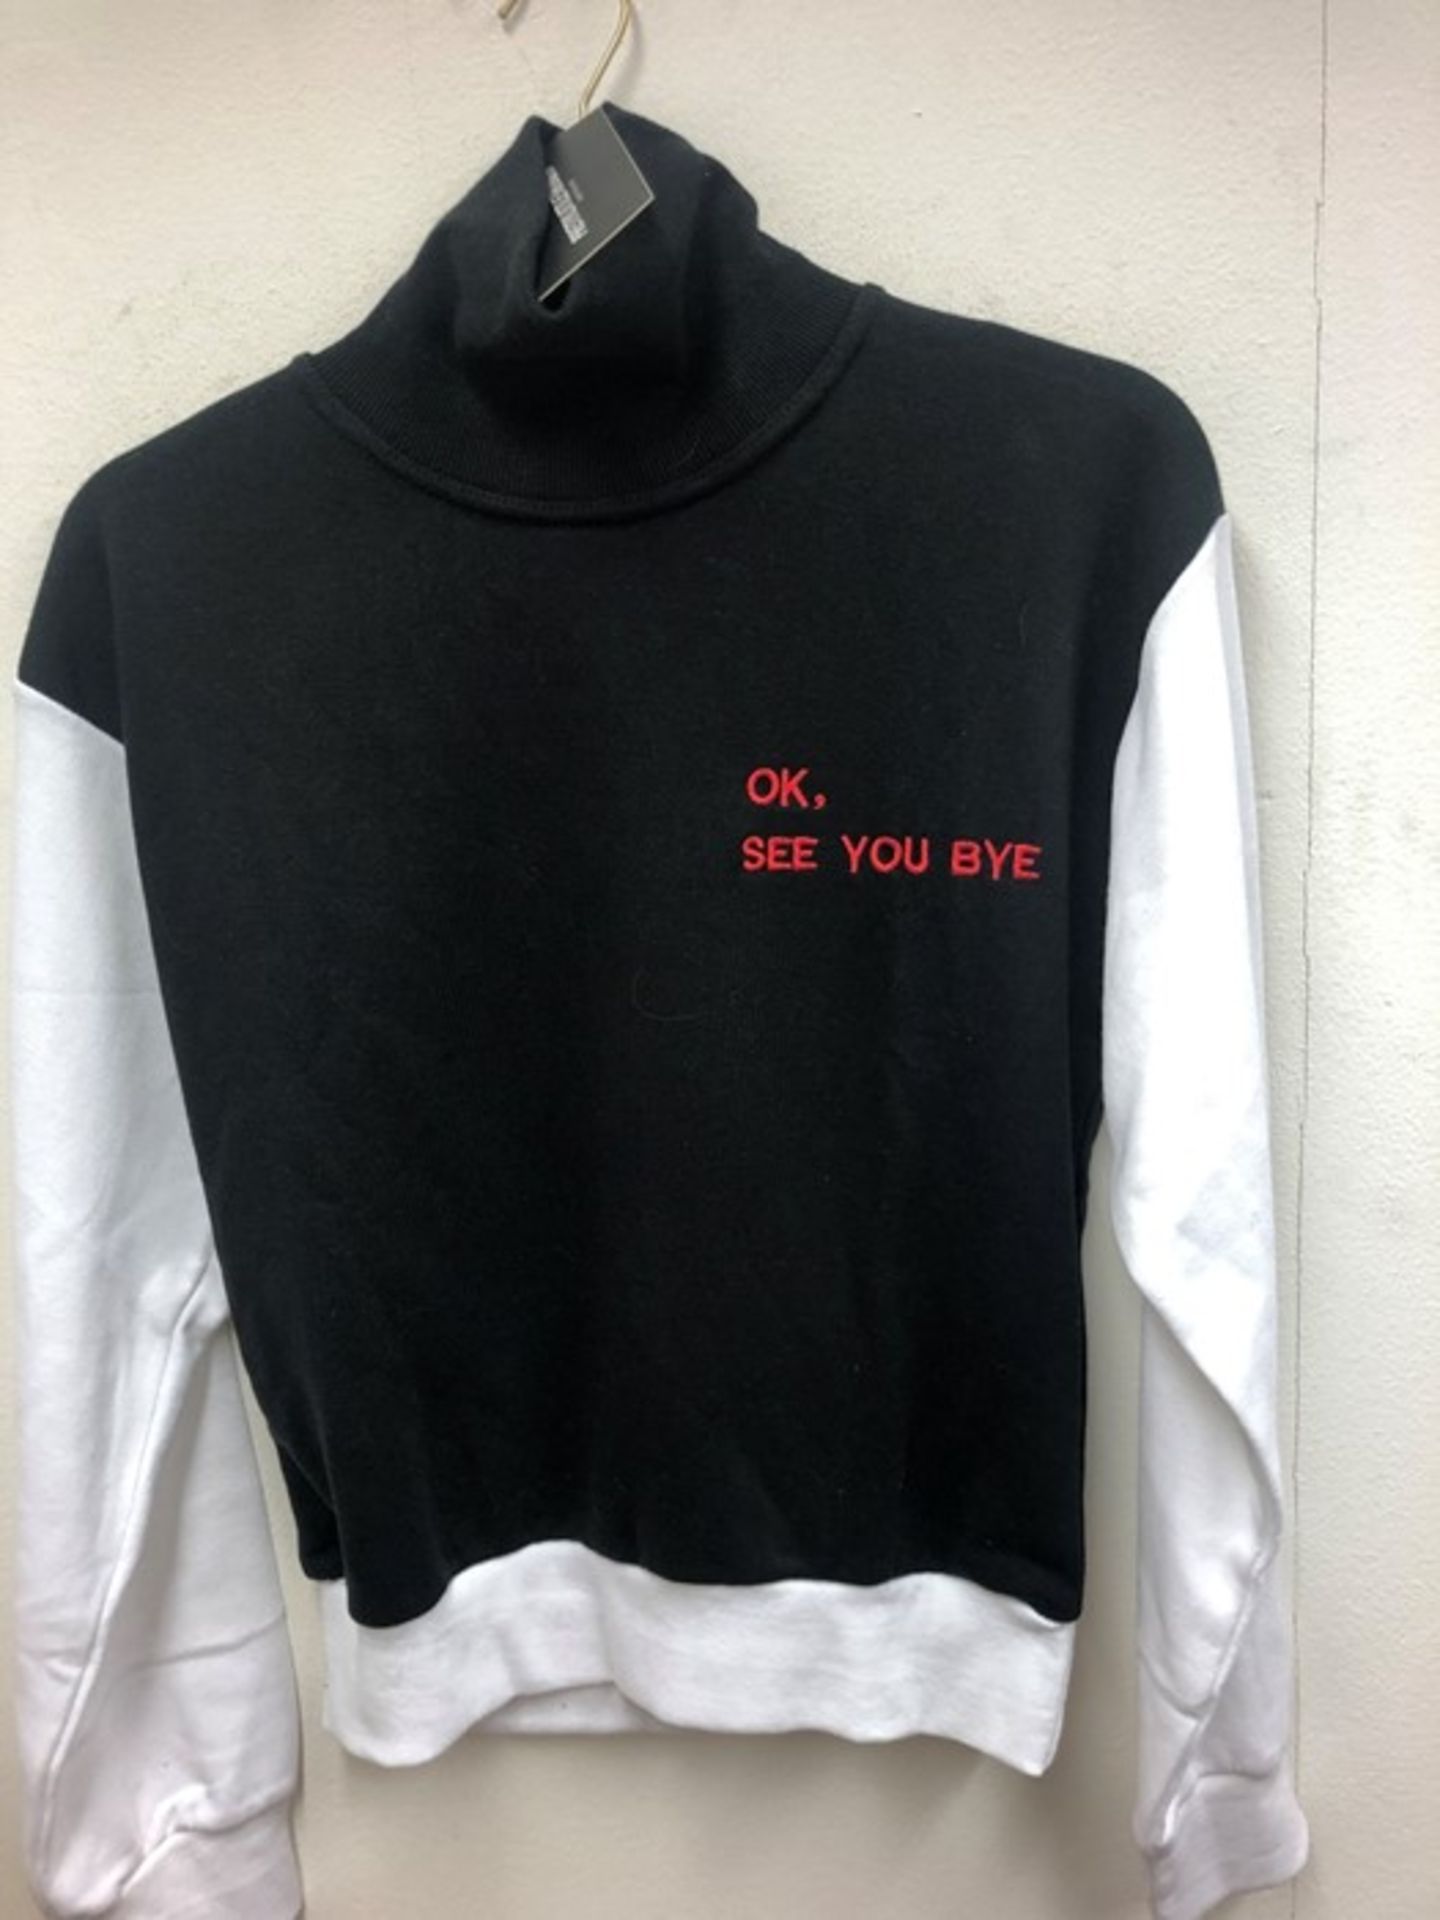 1 PRETTY LITTLE THING BLACK OK, SEE YOU BYE SLOGAN HIGH NECK SWEATER / SIZE - 6 (VIEWING HIGHLY